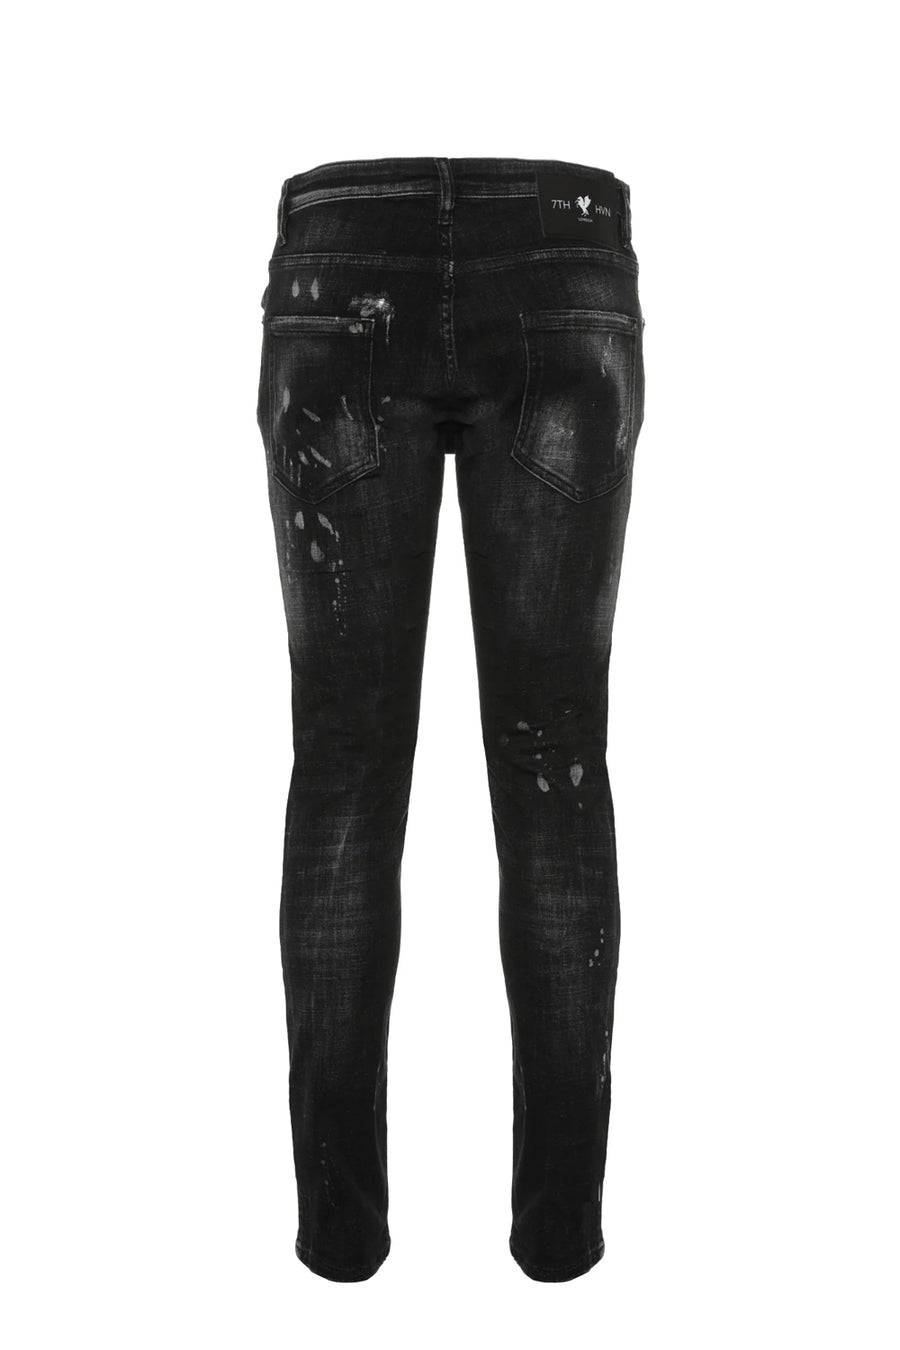 Buy the 7TH HVN S 2767 Jean Black at Intro. Spend £50 for free UK delivery. Official stockists. We ship worldwide.